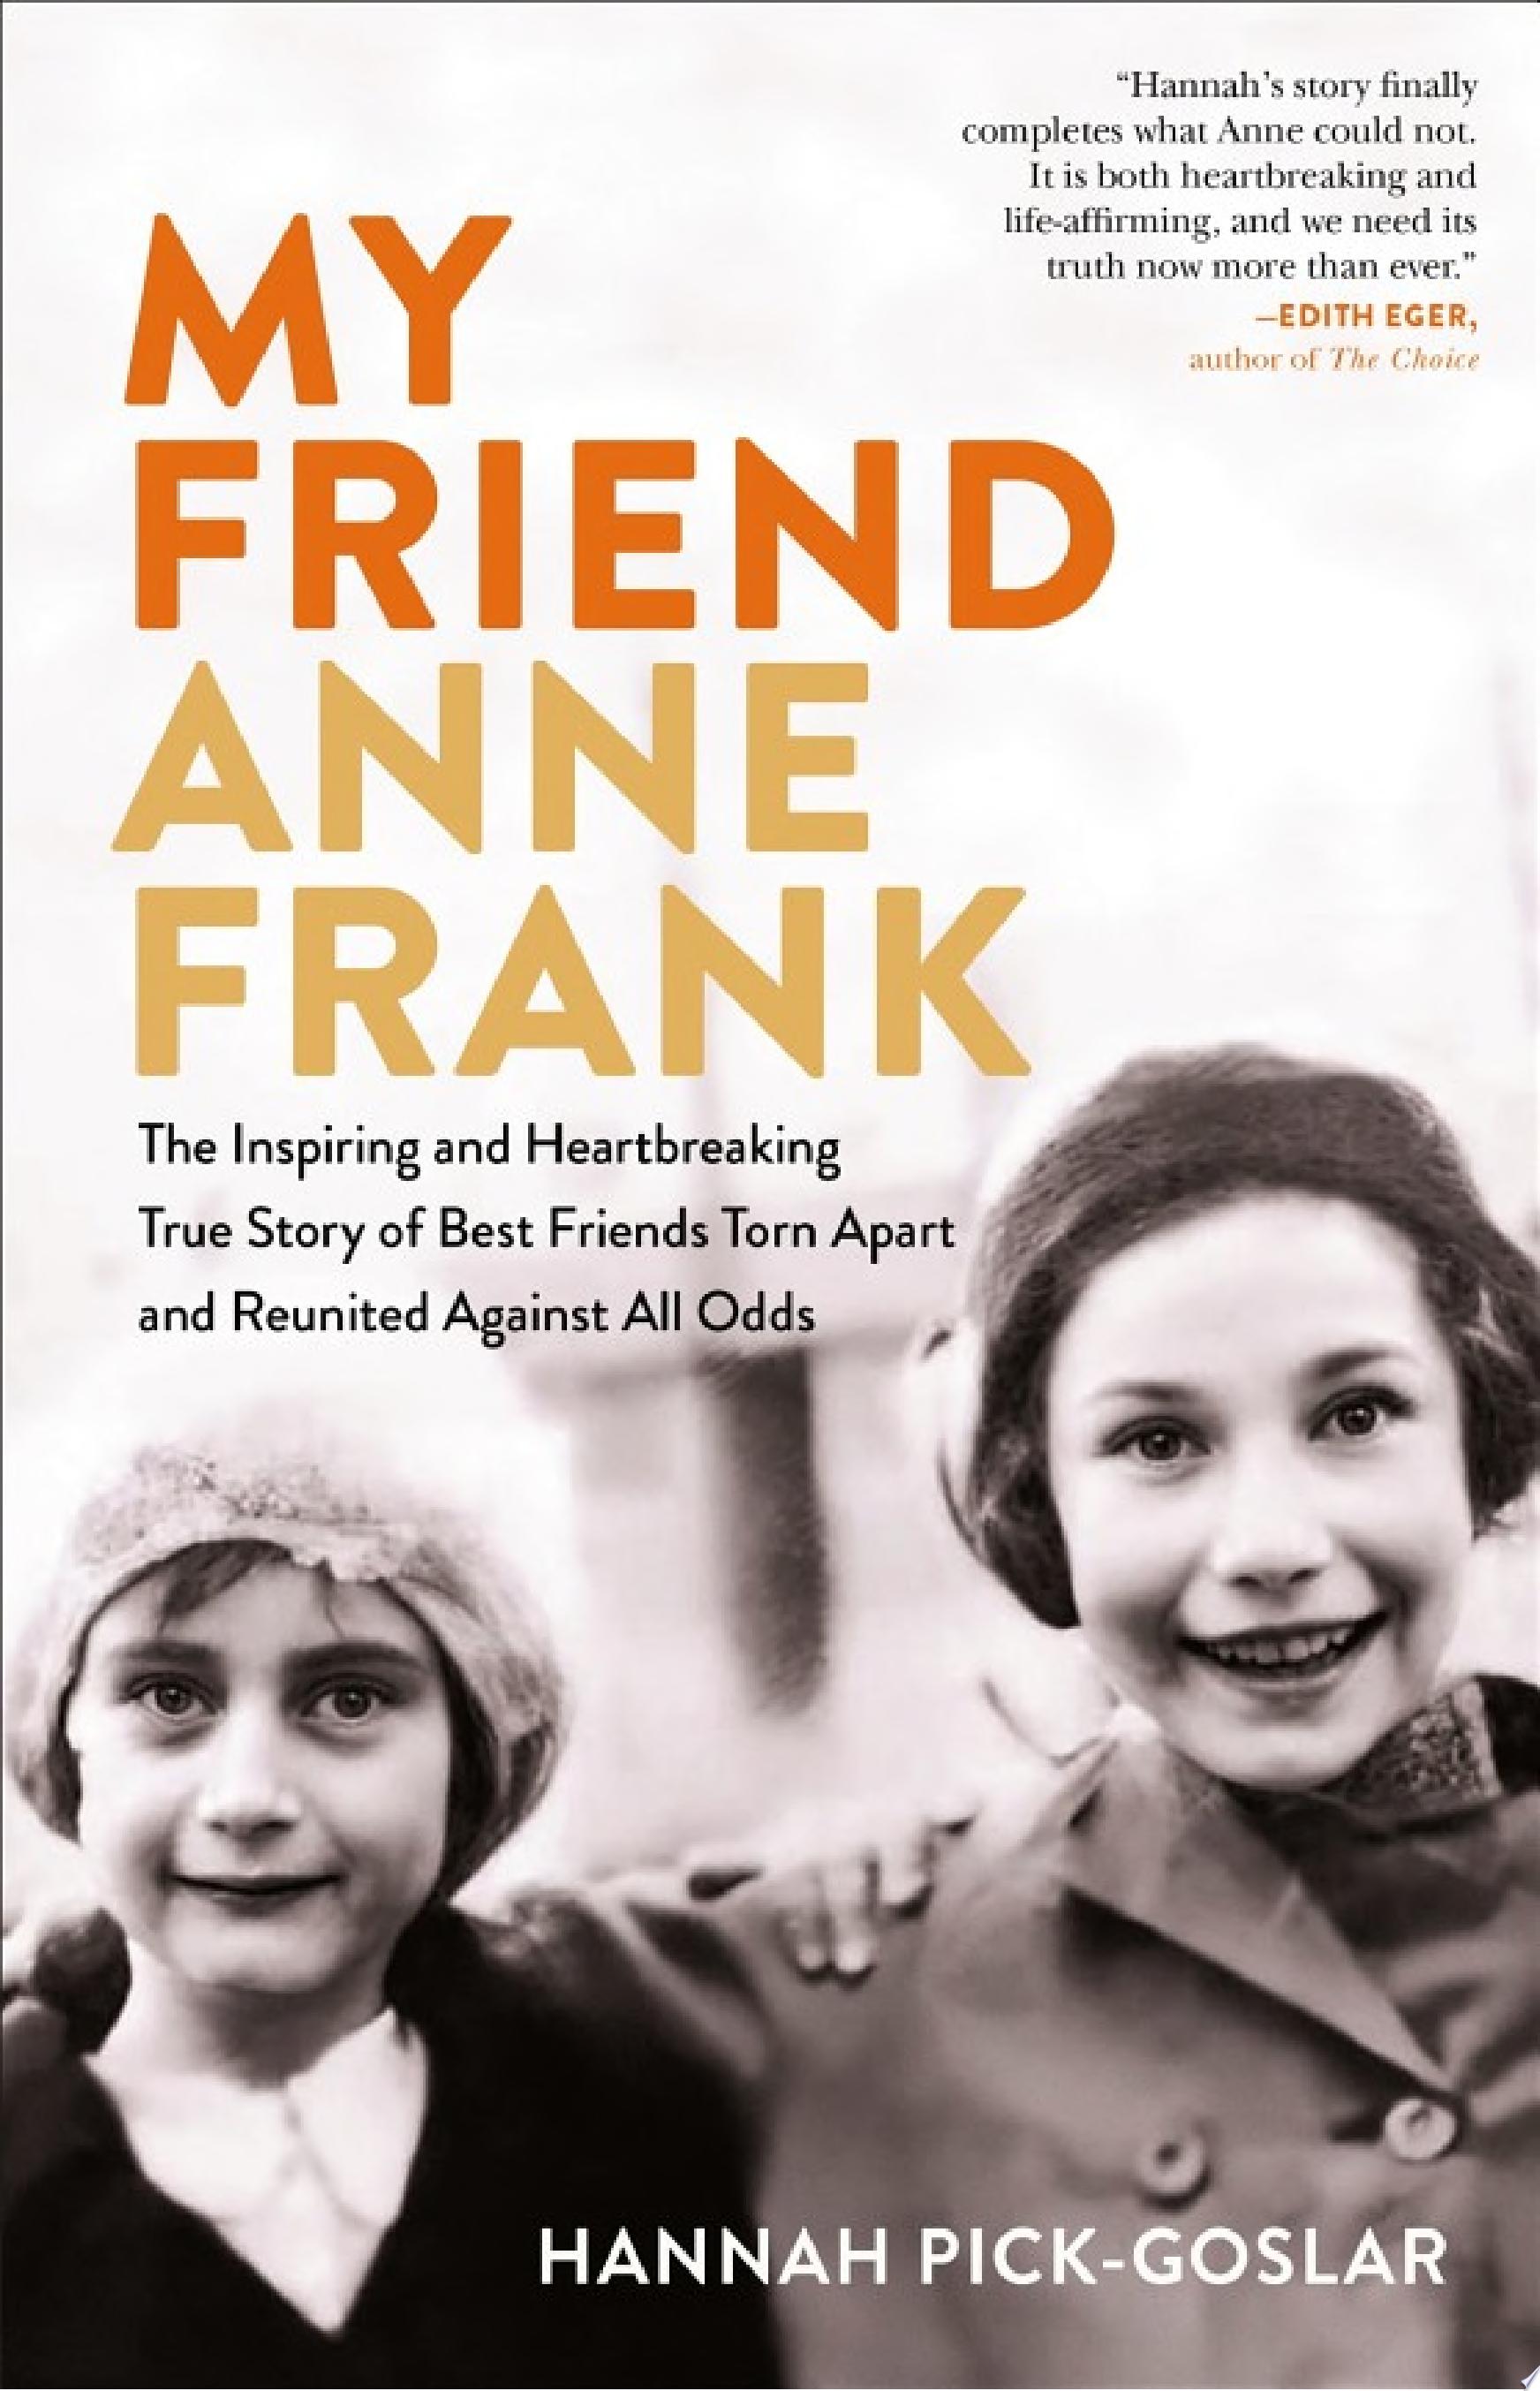 Image for "My Friend Anne Frank"